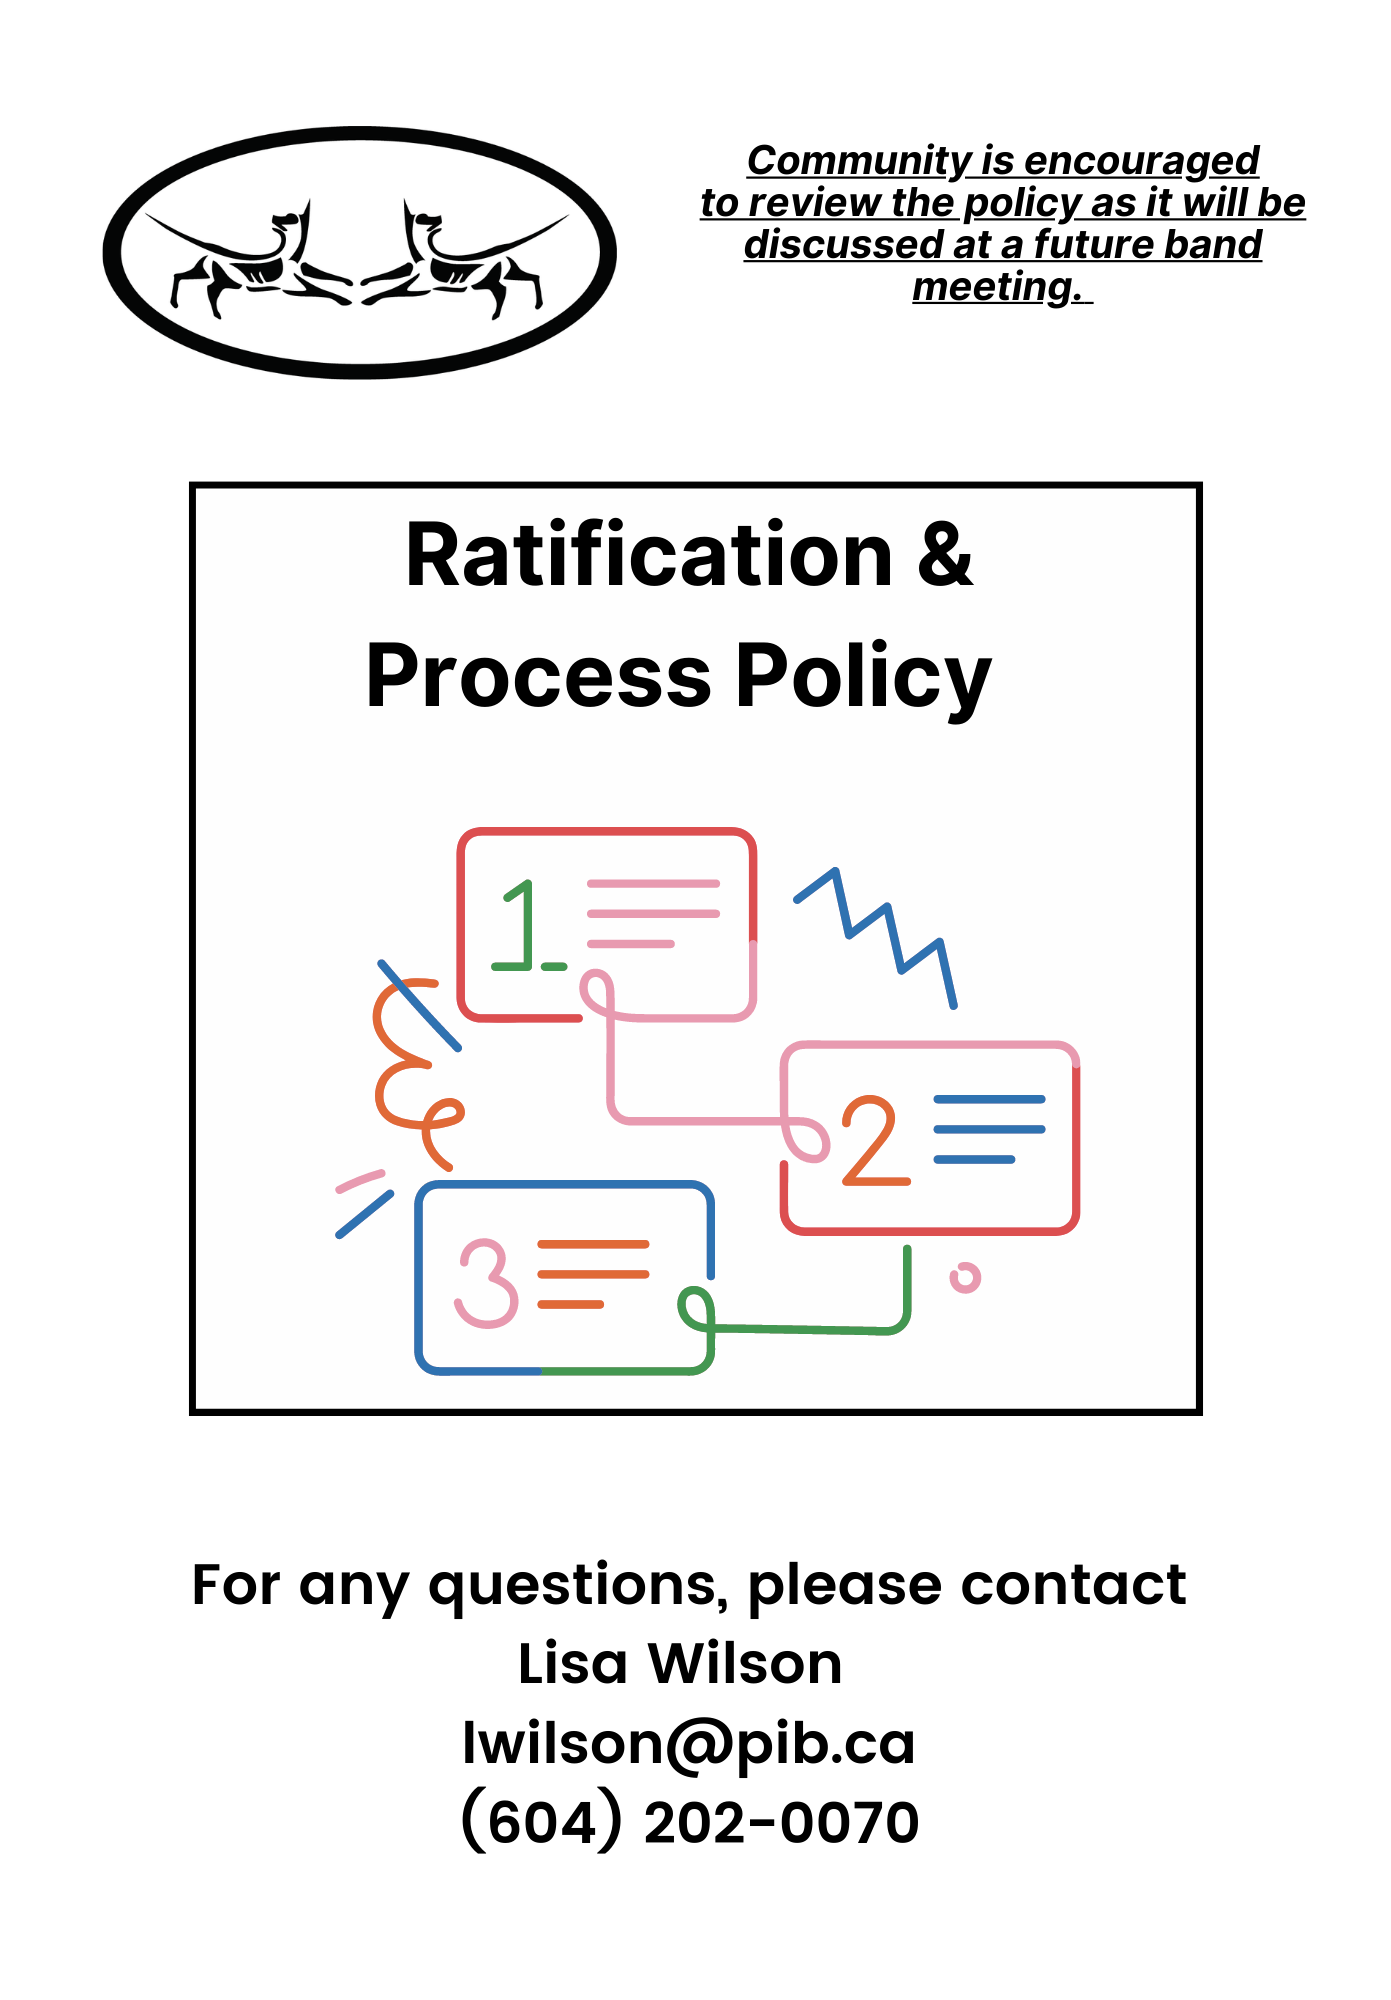 Ratification and Process Policy